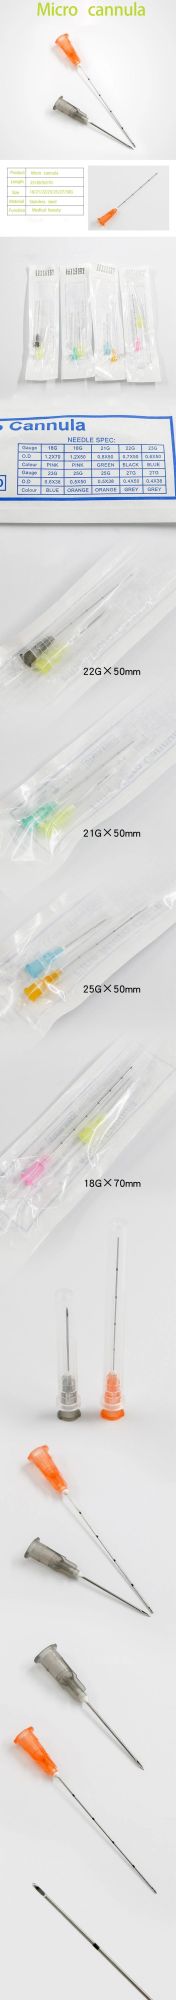 China Cannula Manufacturer Made International Standard Disposable Standard Hypodermic Needle